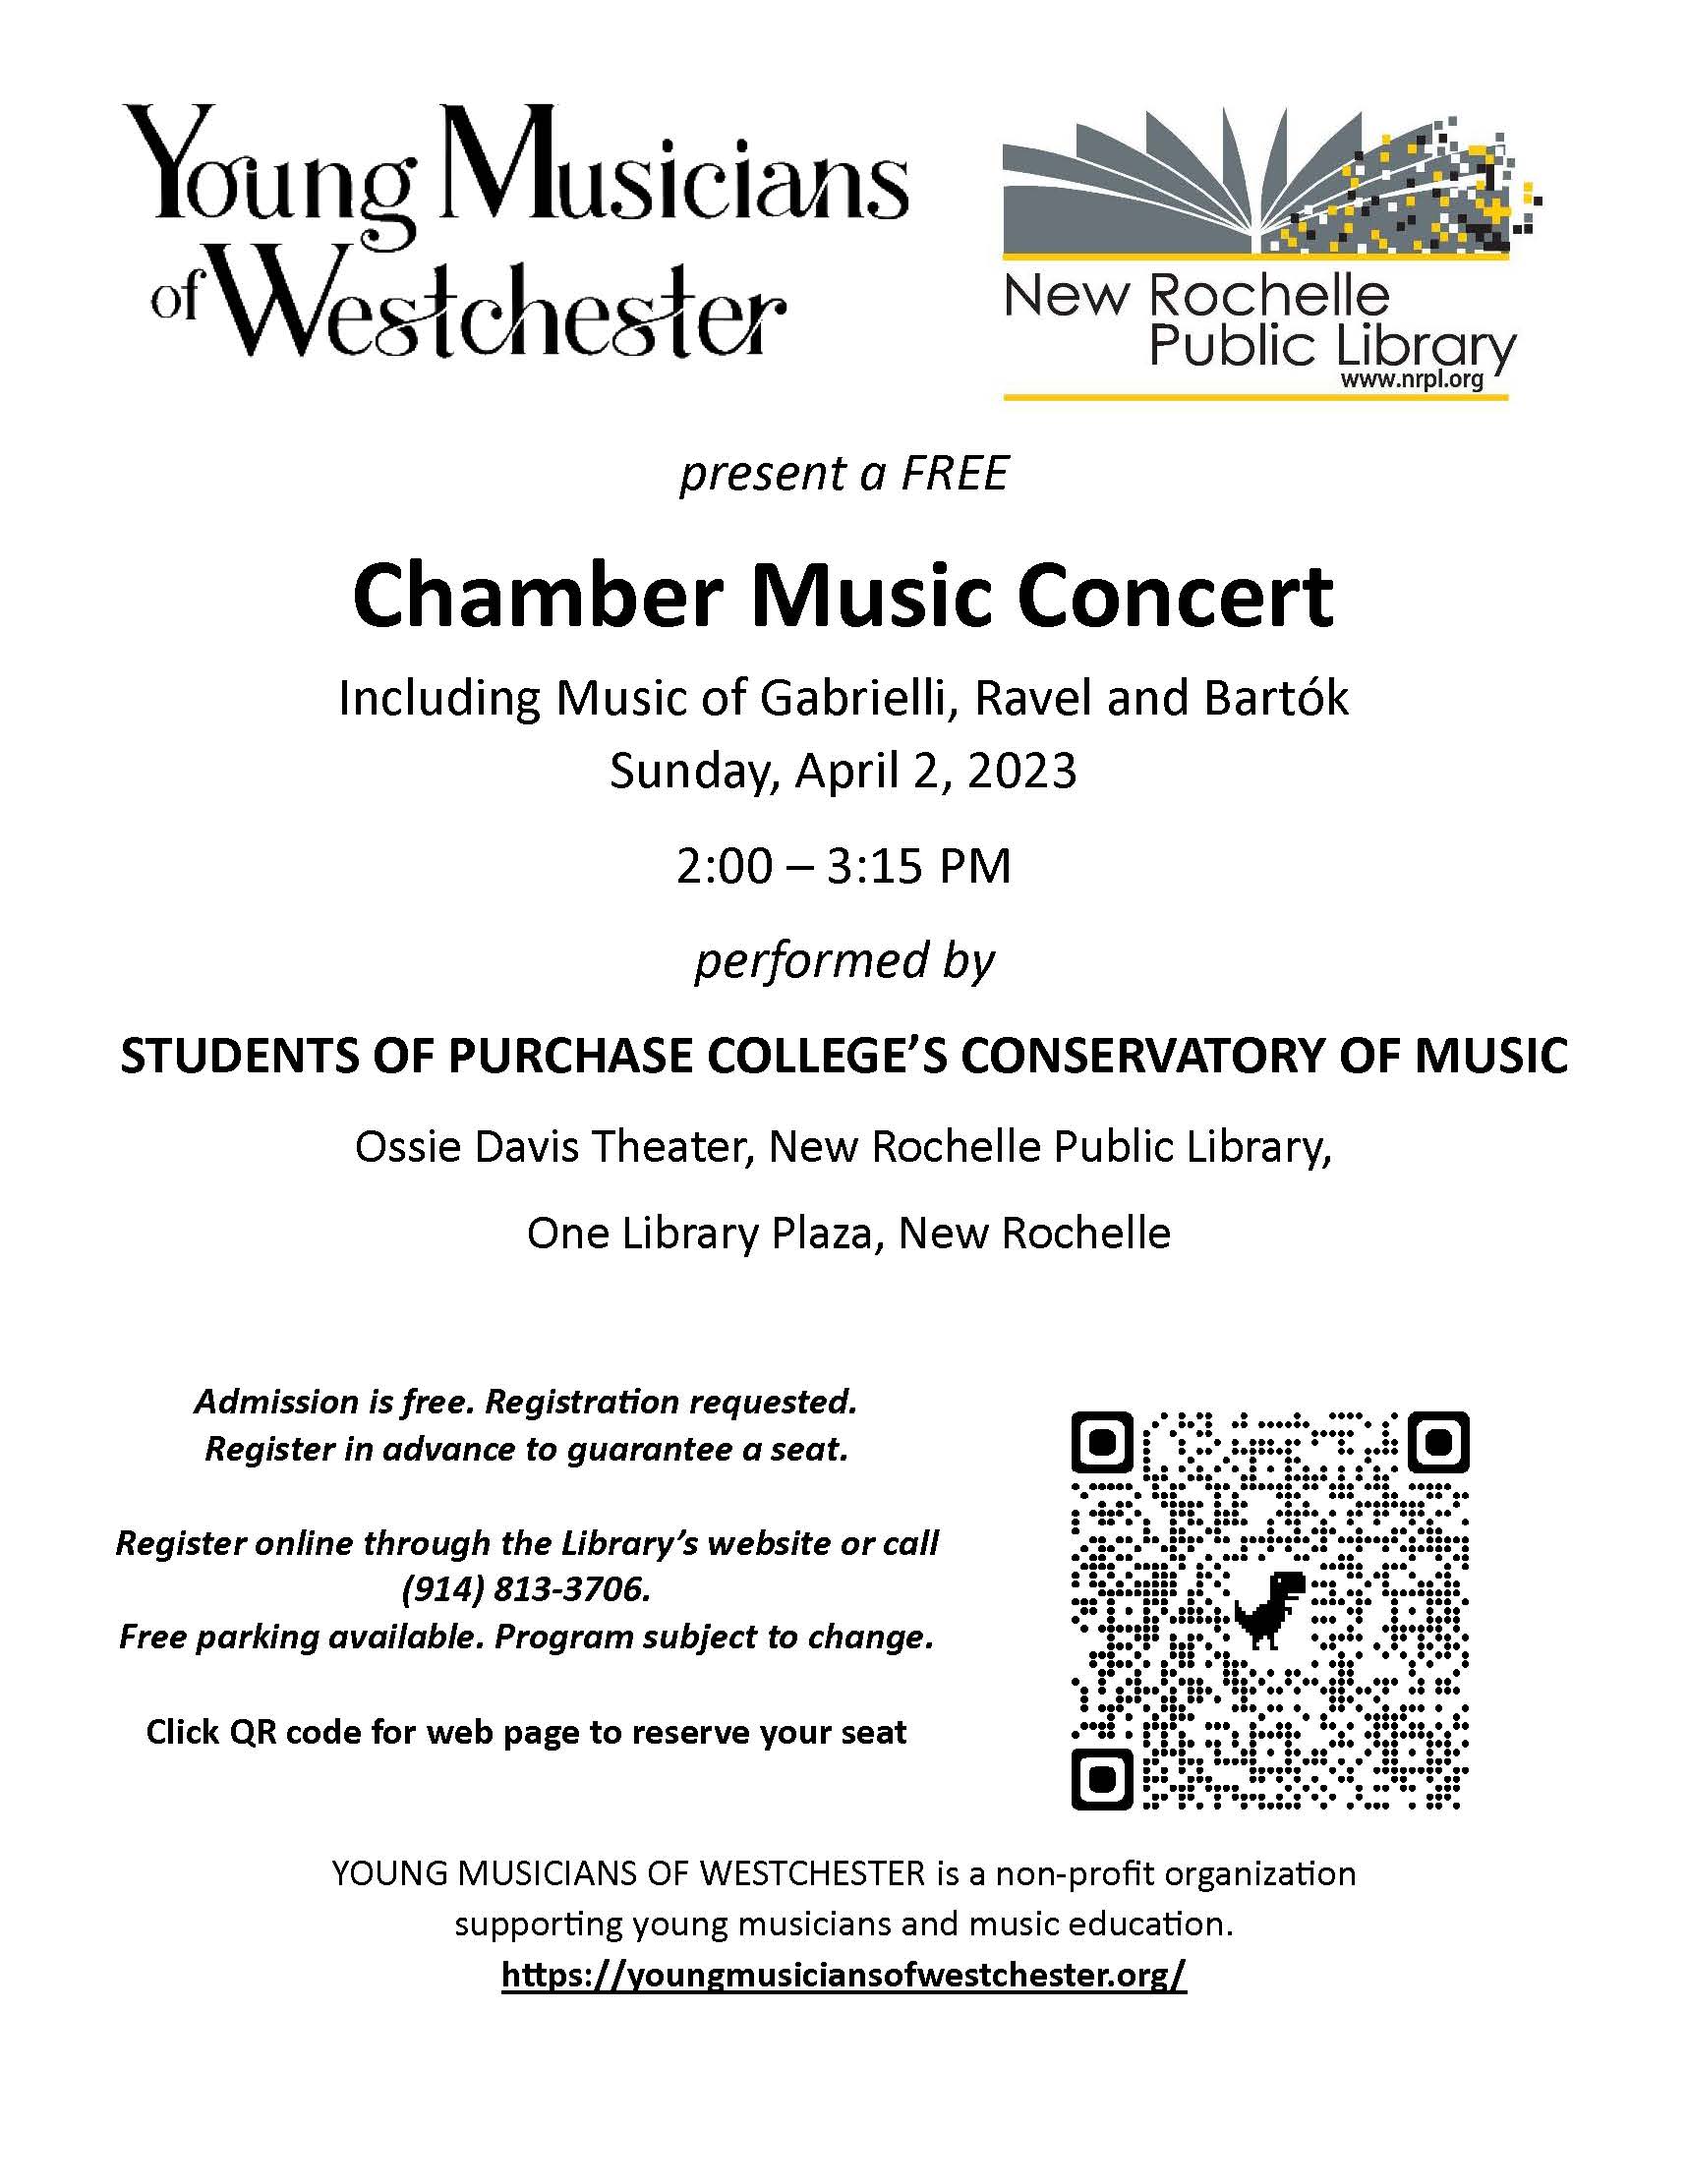 Young Musicians of Westchester